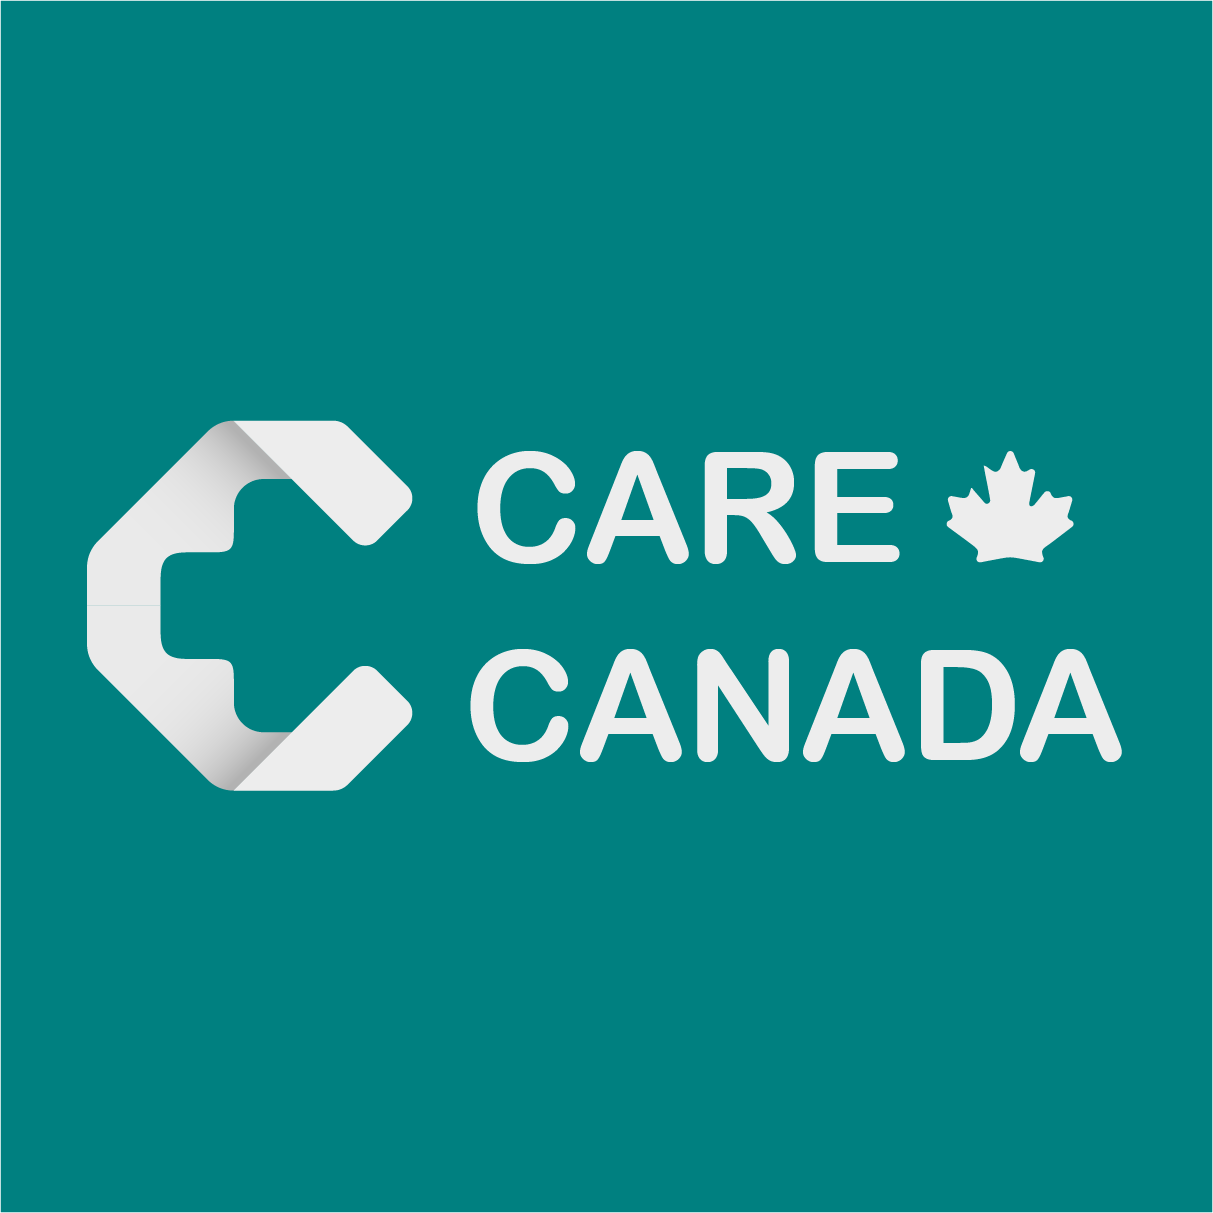 CareCanada Introduces Patient-Centric Approach to Patient Referral and Online Presence